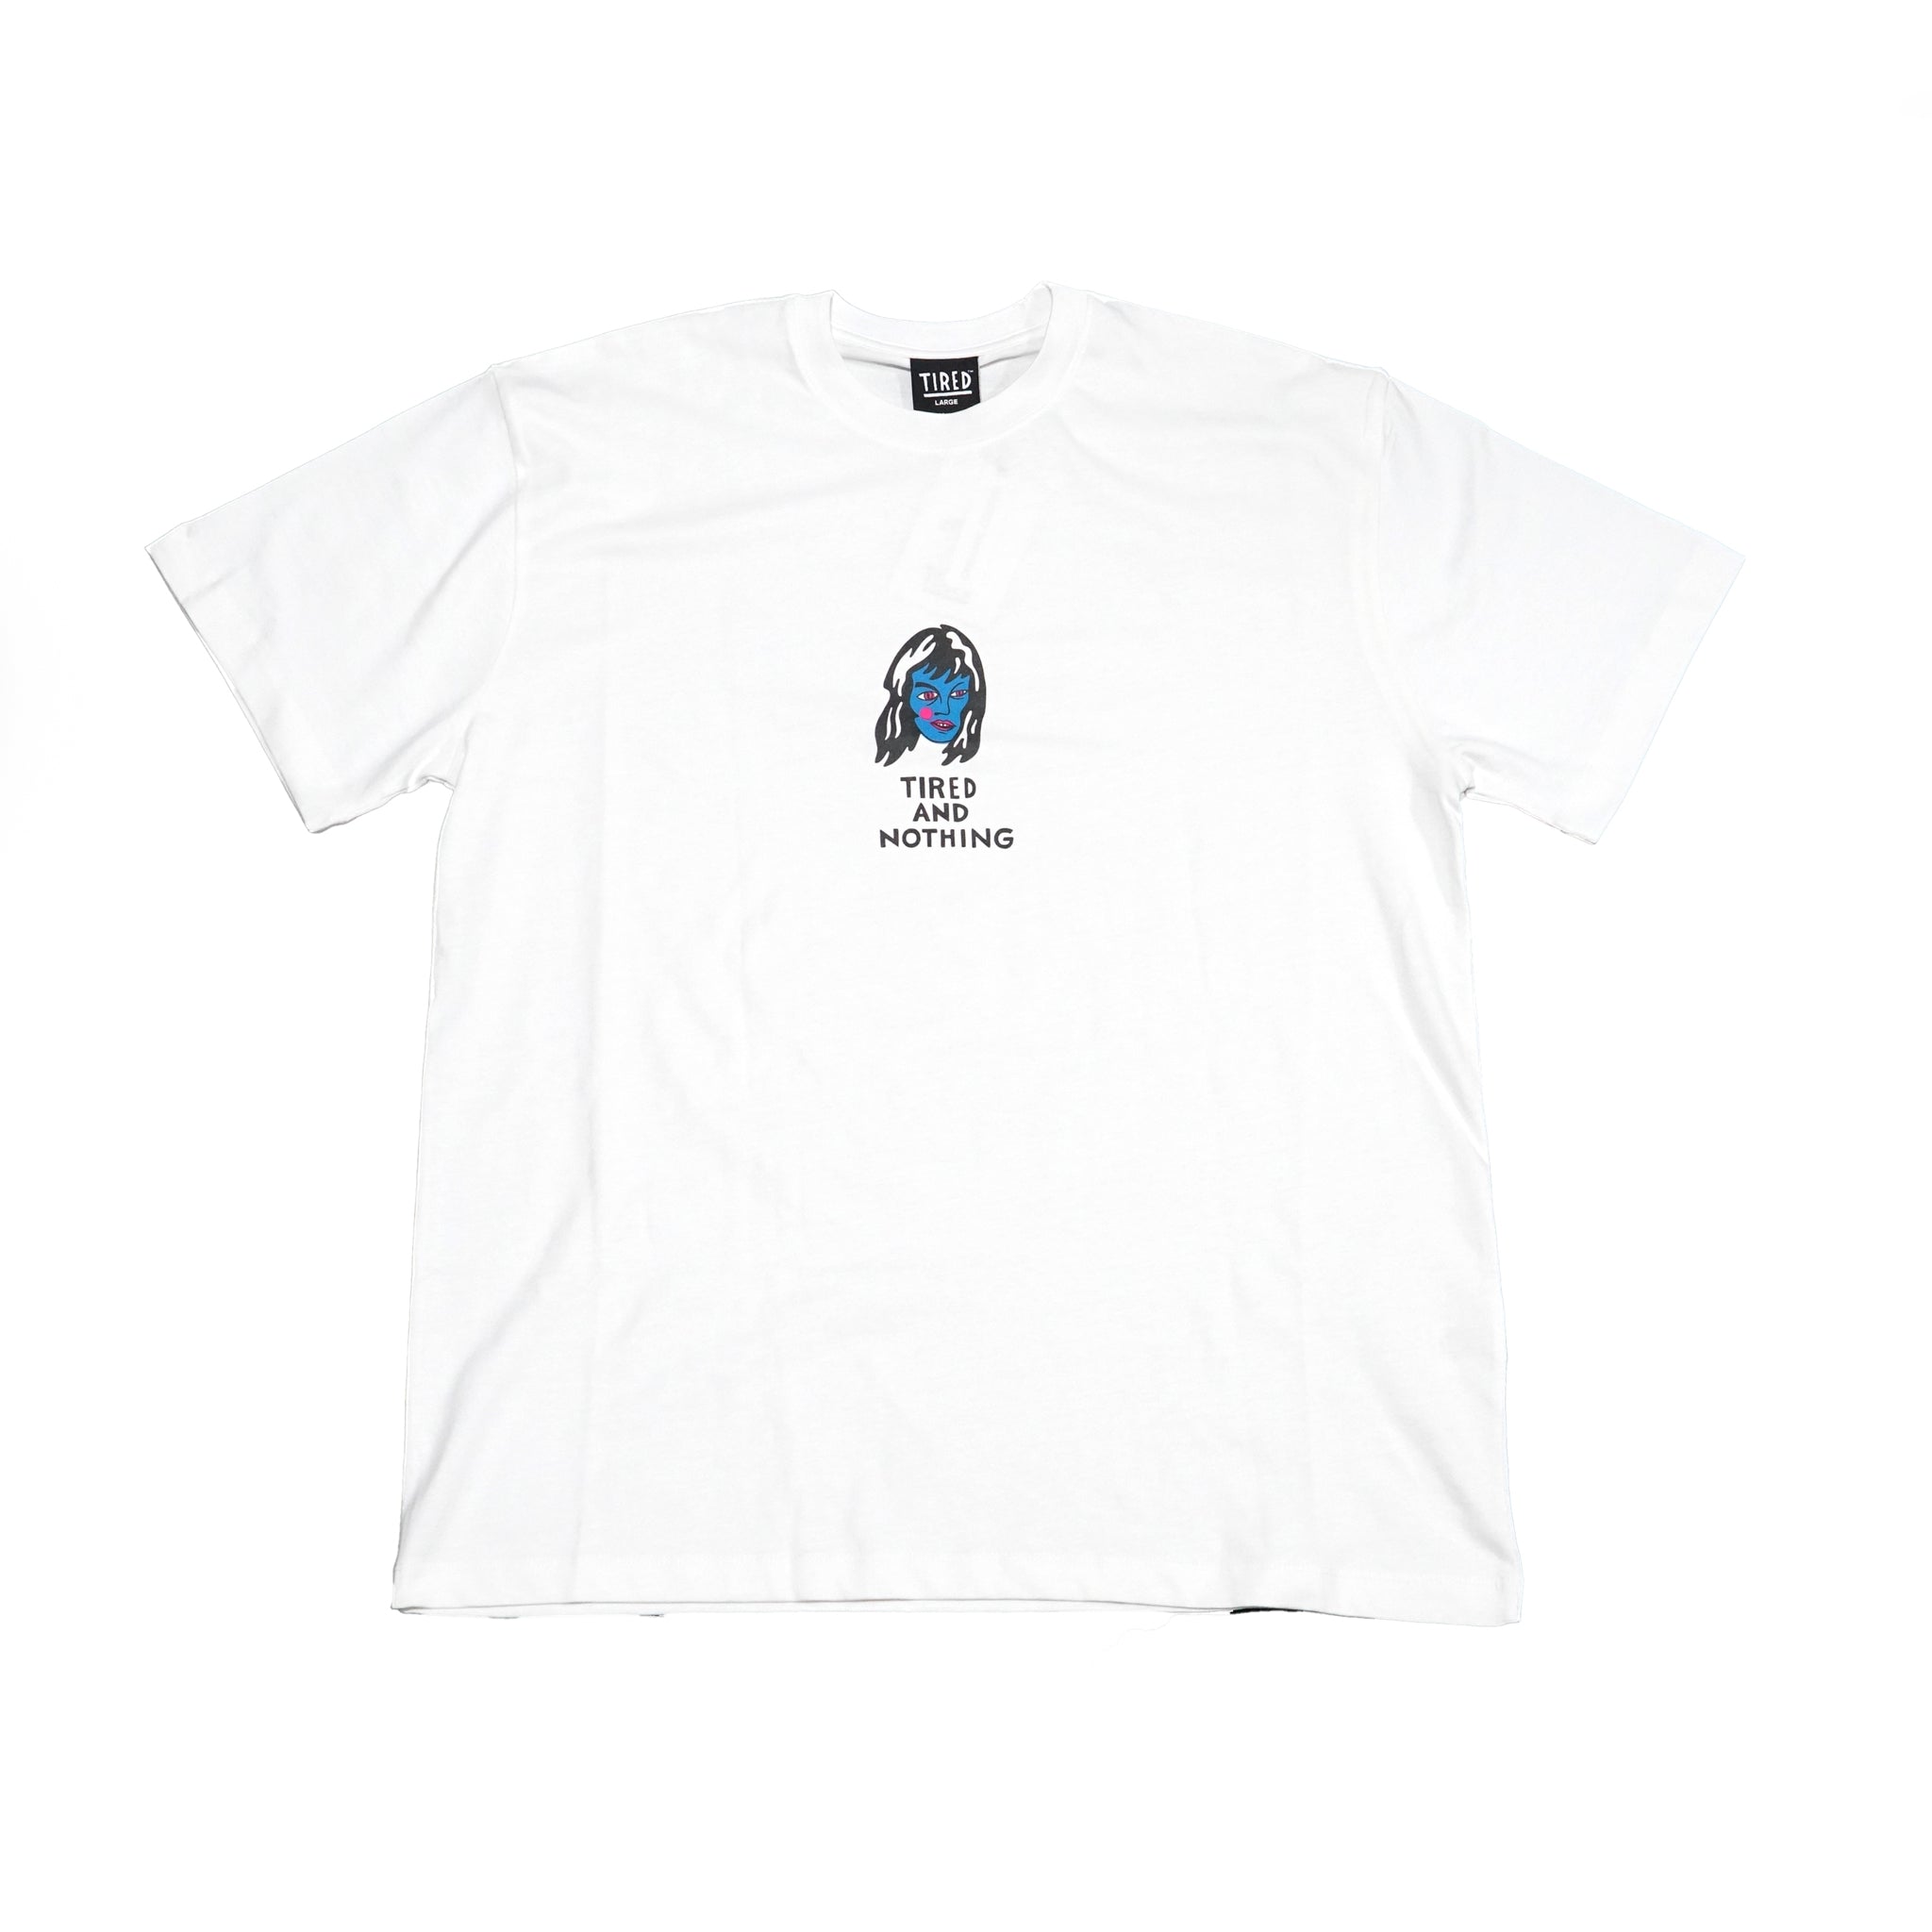 No:TS00265 | Name:GHOST SS TEE (ORGANIC) | Color:White【TIRED_タイレッド】【ネコポス選択可能】